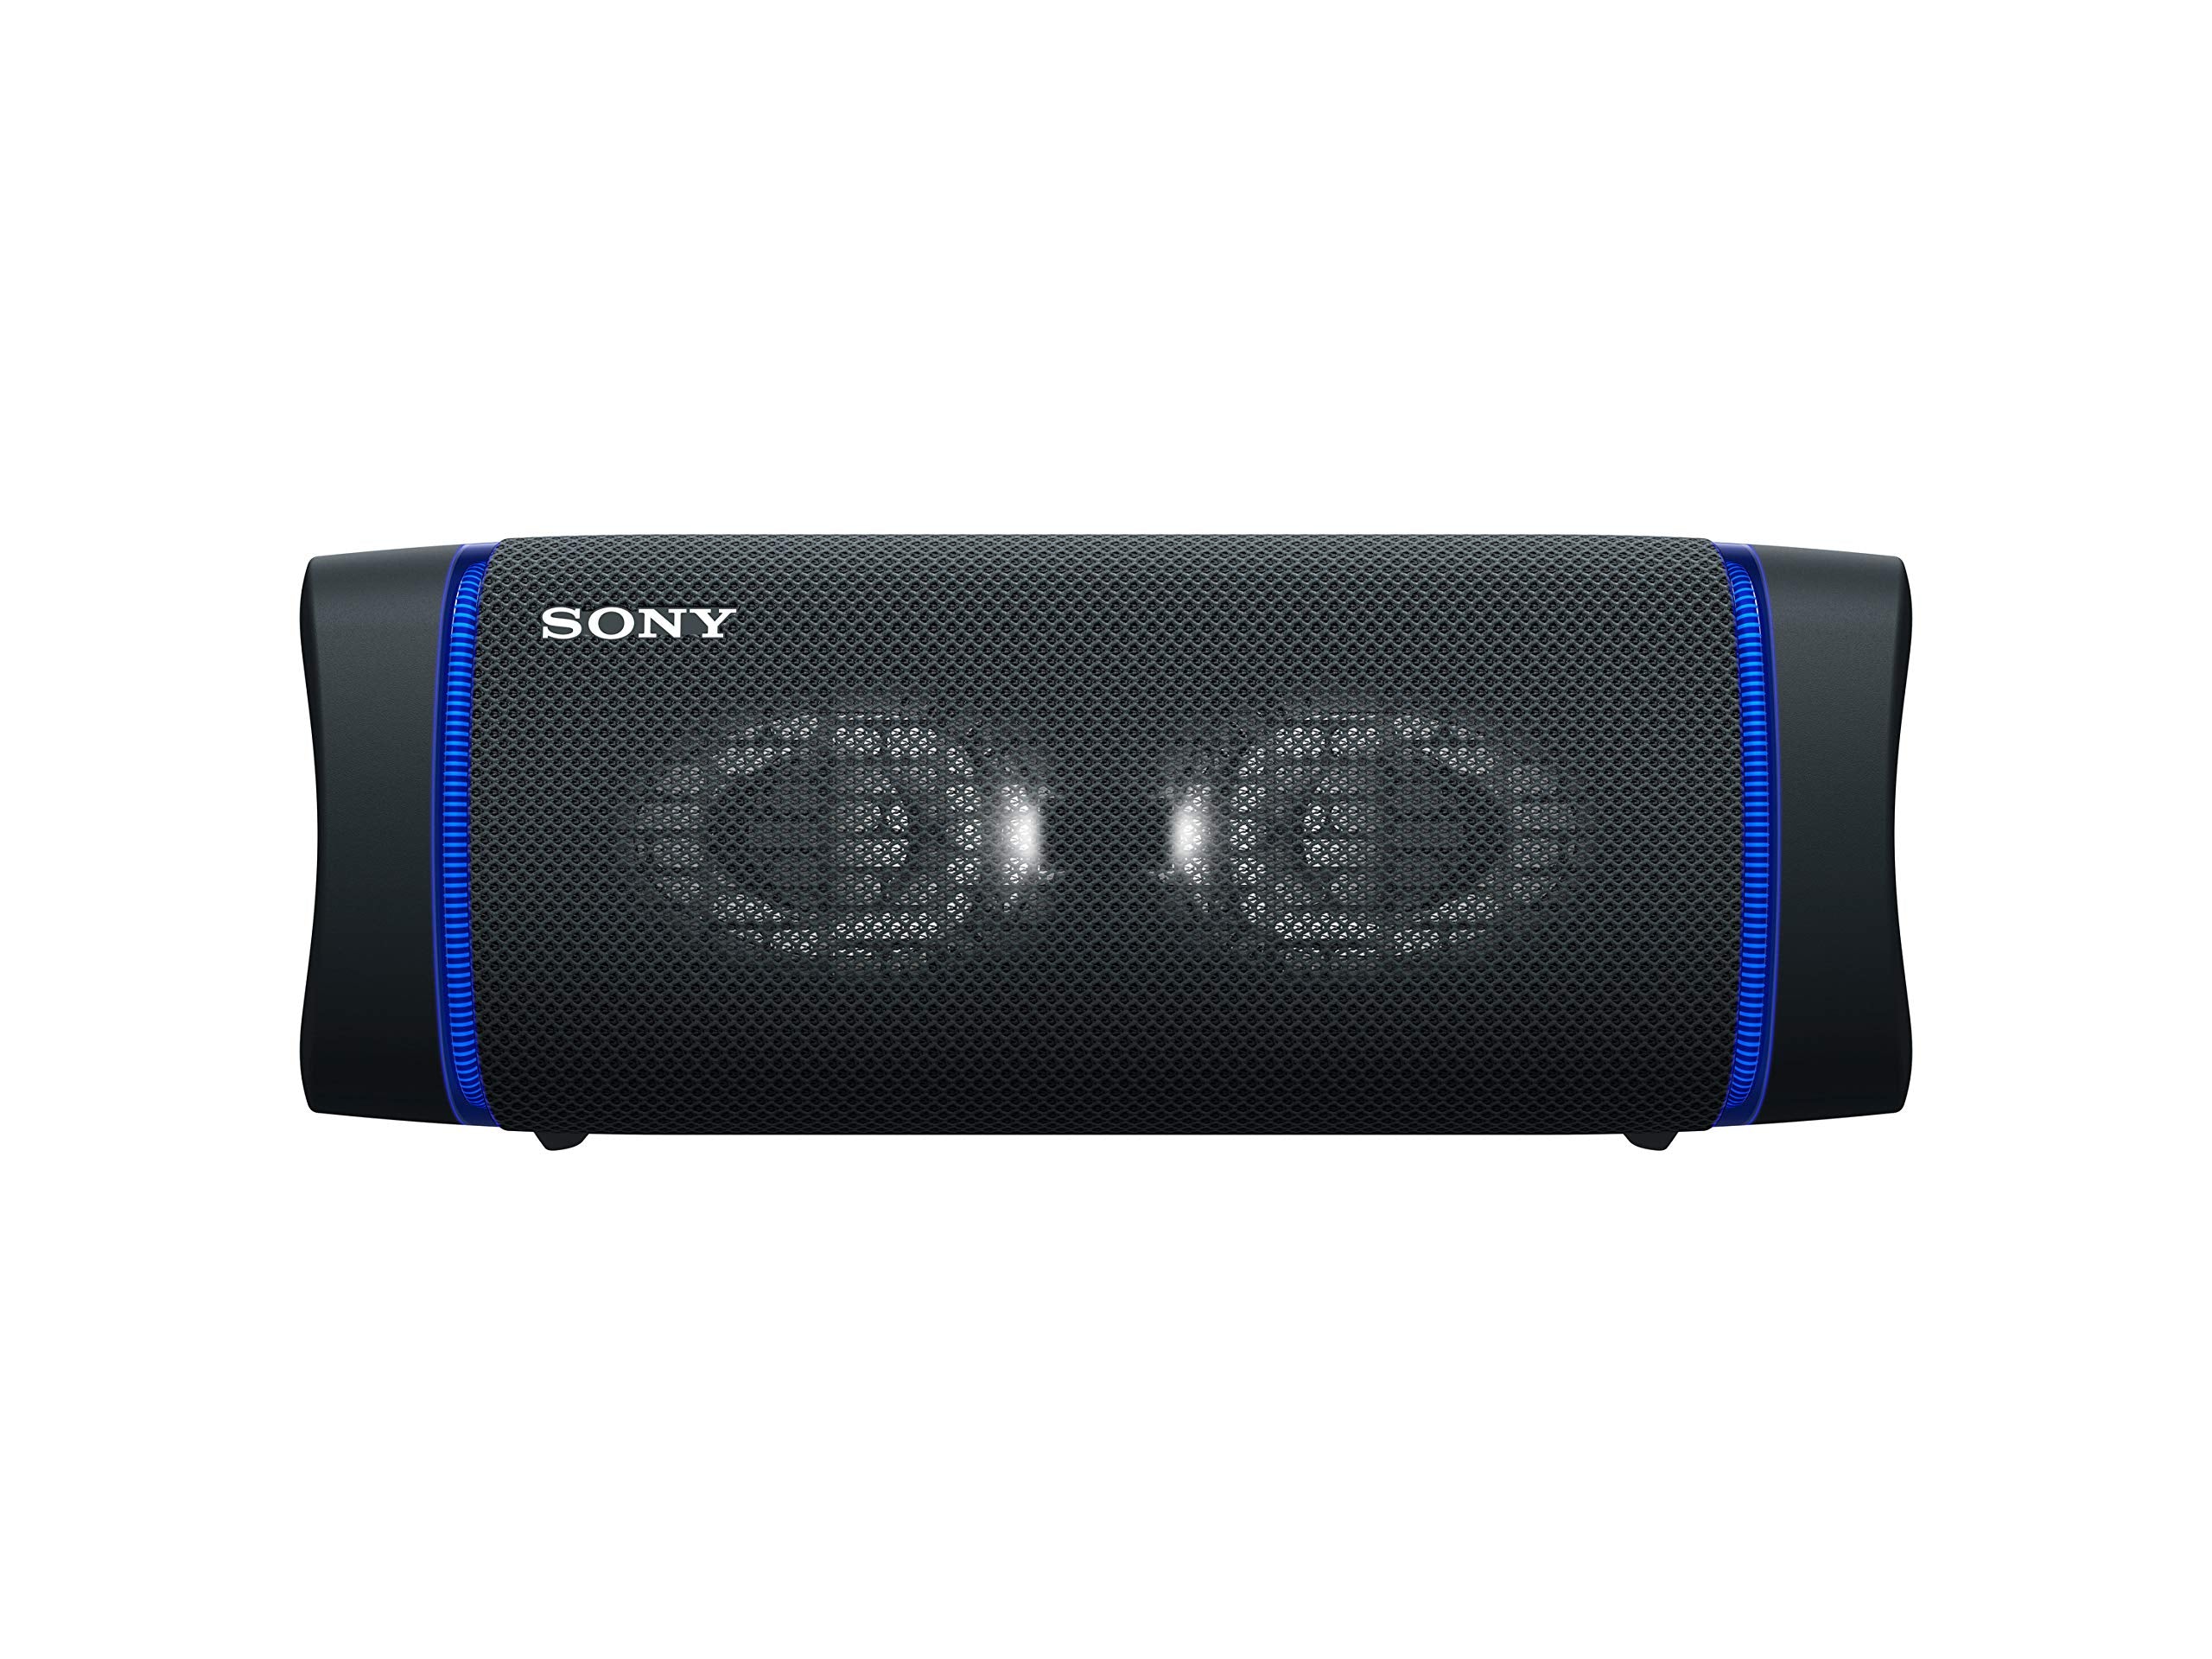 Sony SRS-XB33 – Portable, Waterproof, Powerful and Durable Wireless Bluetooth Speaker with EXTRA BASS and lighting – Black